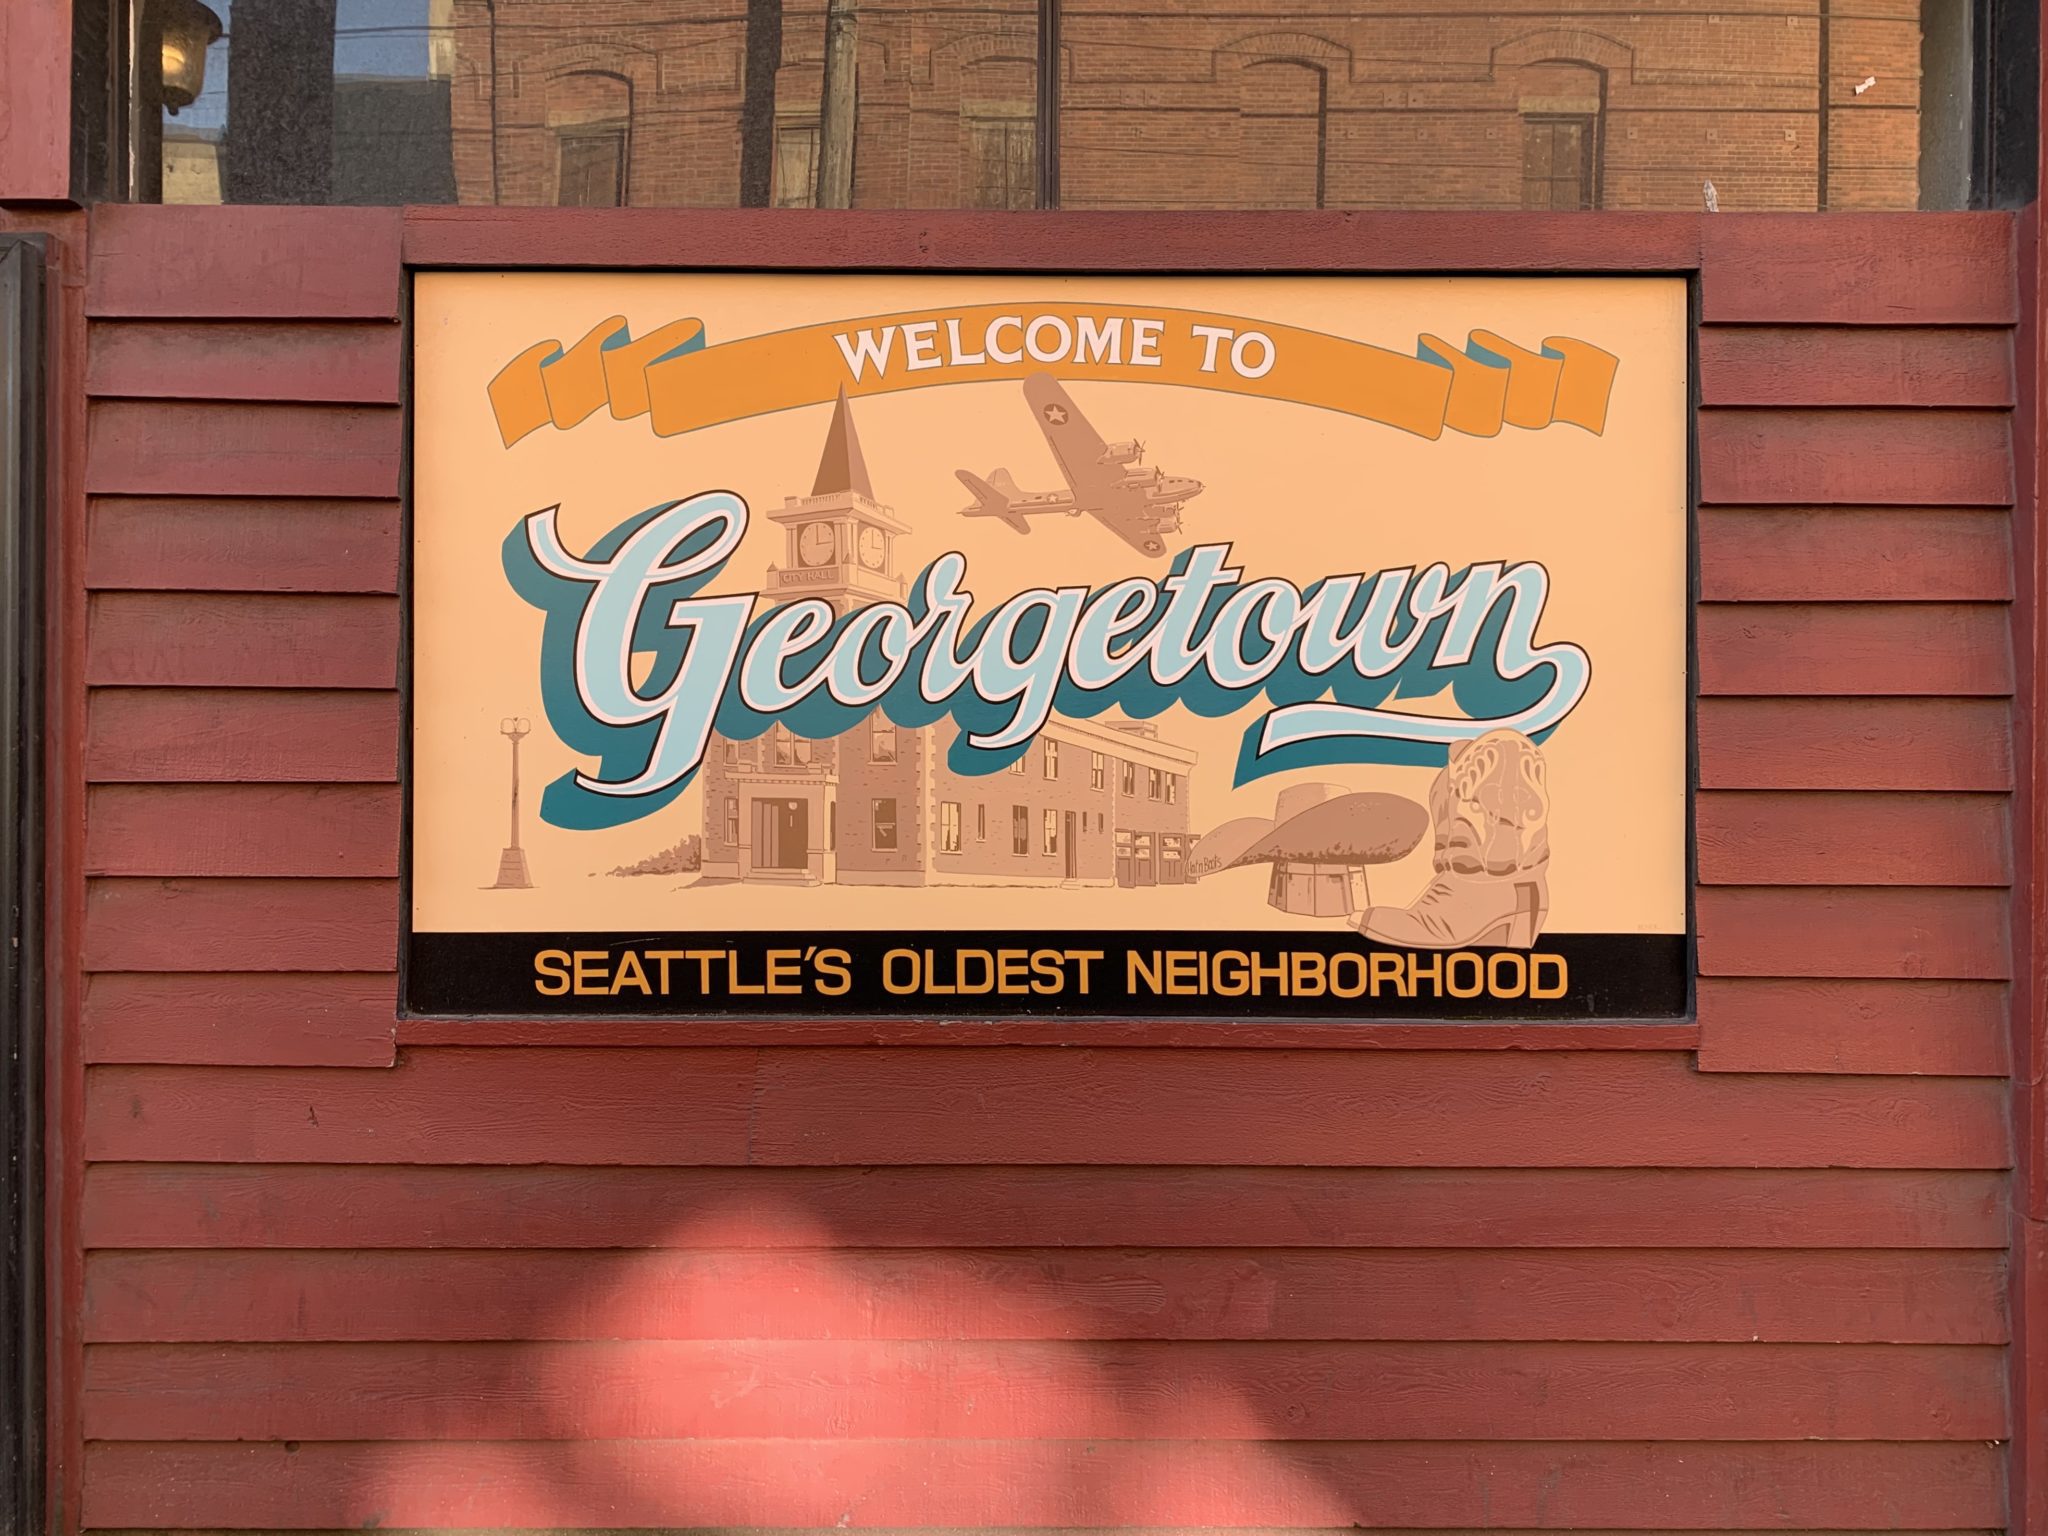 A sign board with 'Georgetown' on it in large light blue letters indicates the name of the neighborhood in Seattle. It is hanging on a large red wall, and the sign board has a light orange background.